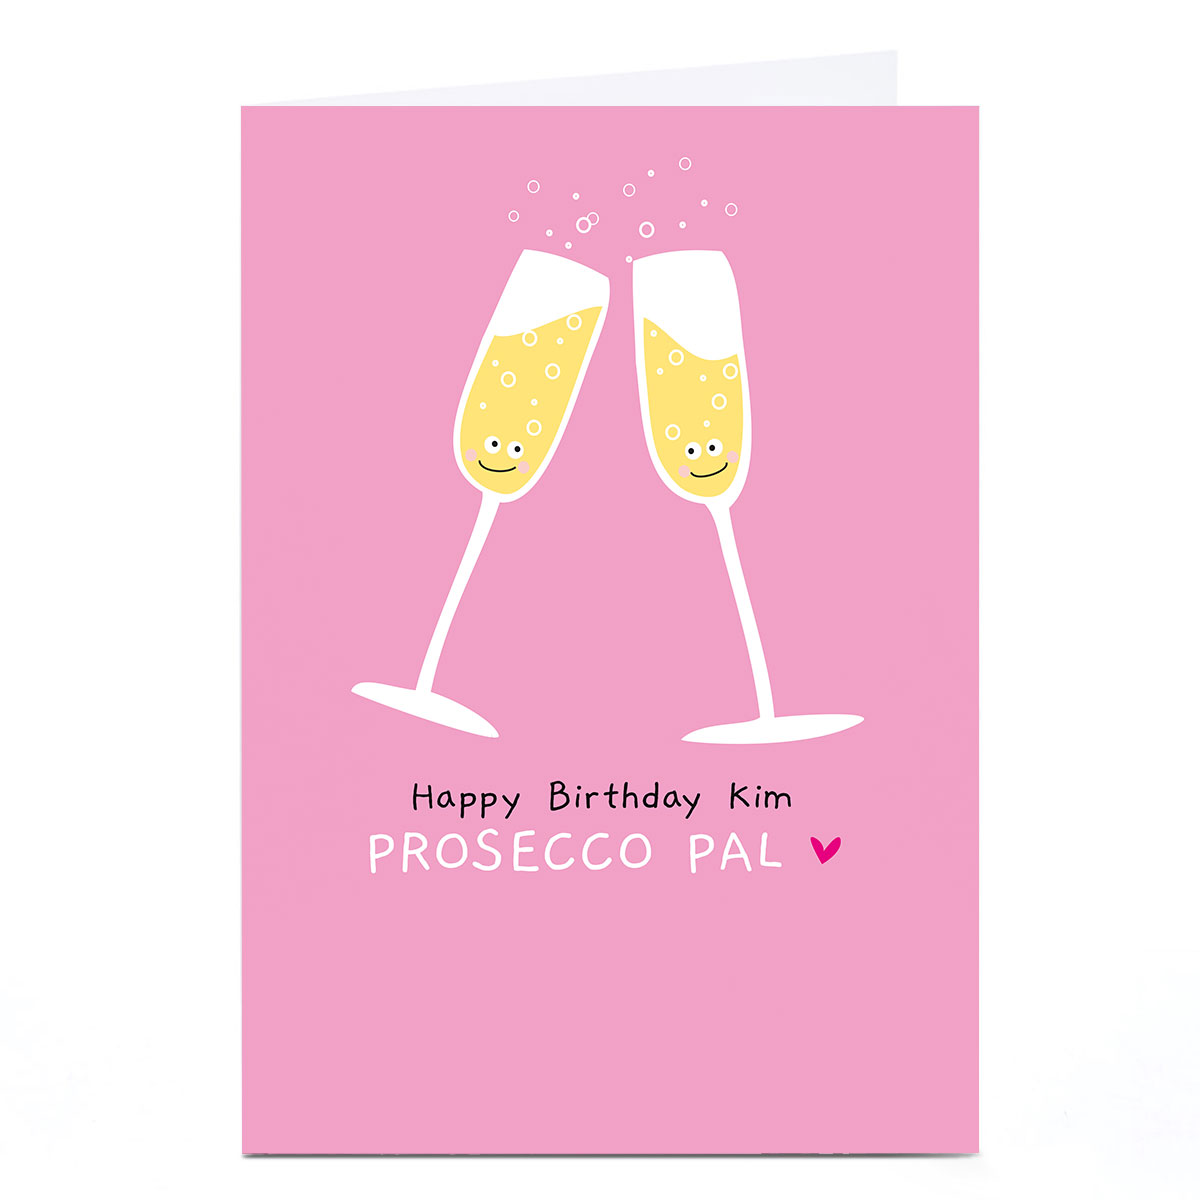 Personalised Whale & Bird Card - Prosecco Pal